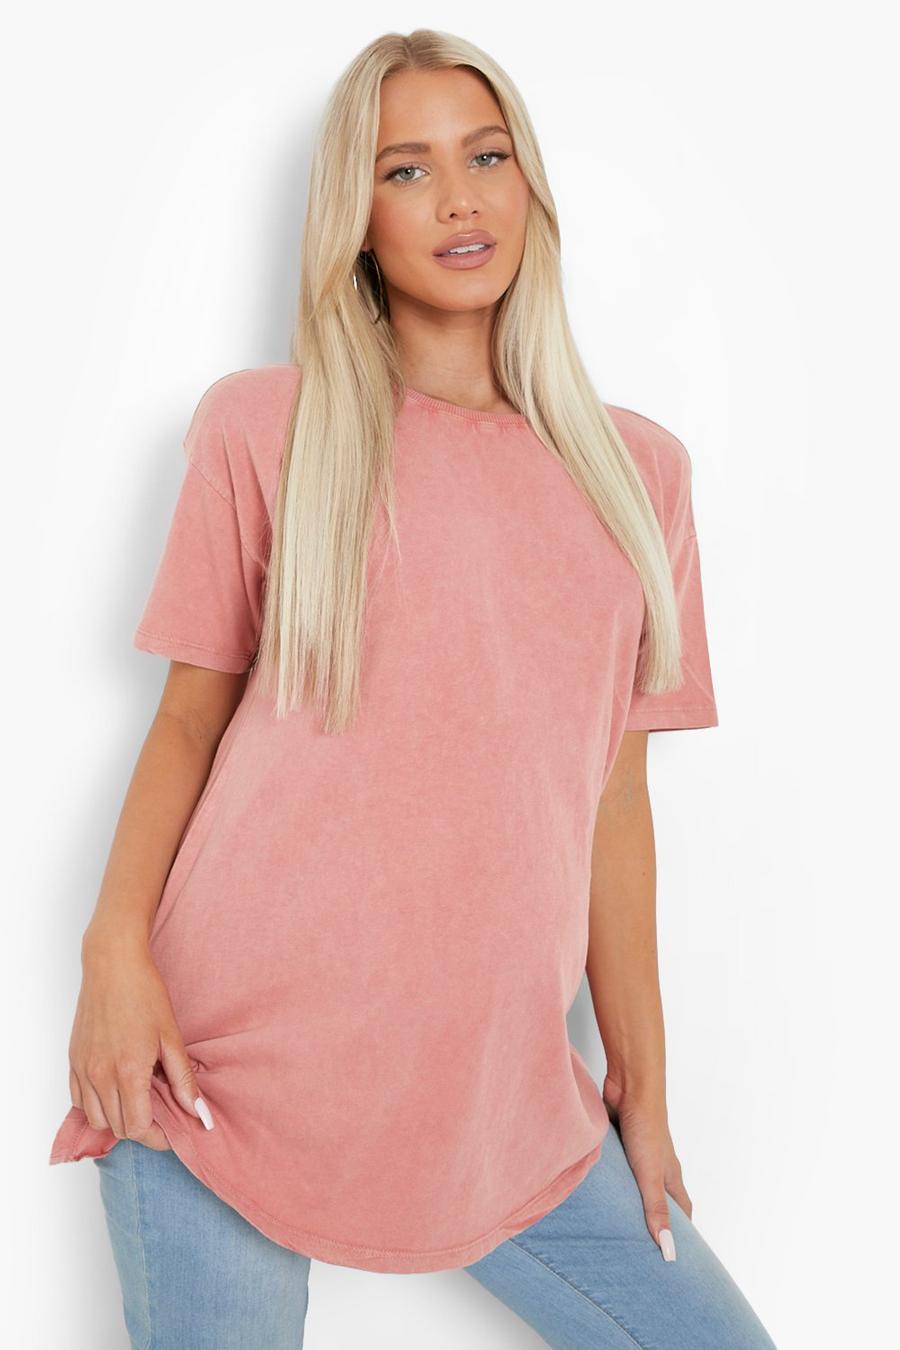 GIGGLES BABY PINK MATERNITY BUCKLE TUNIC T-SHIRT TOP  12 14 16 18 20 NEW 